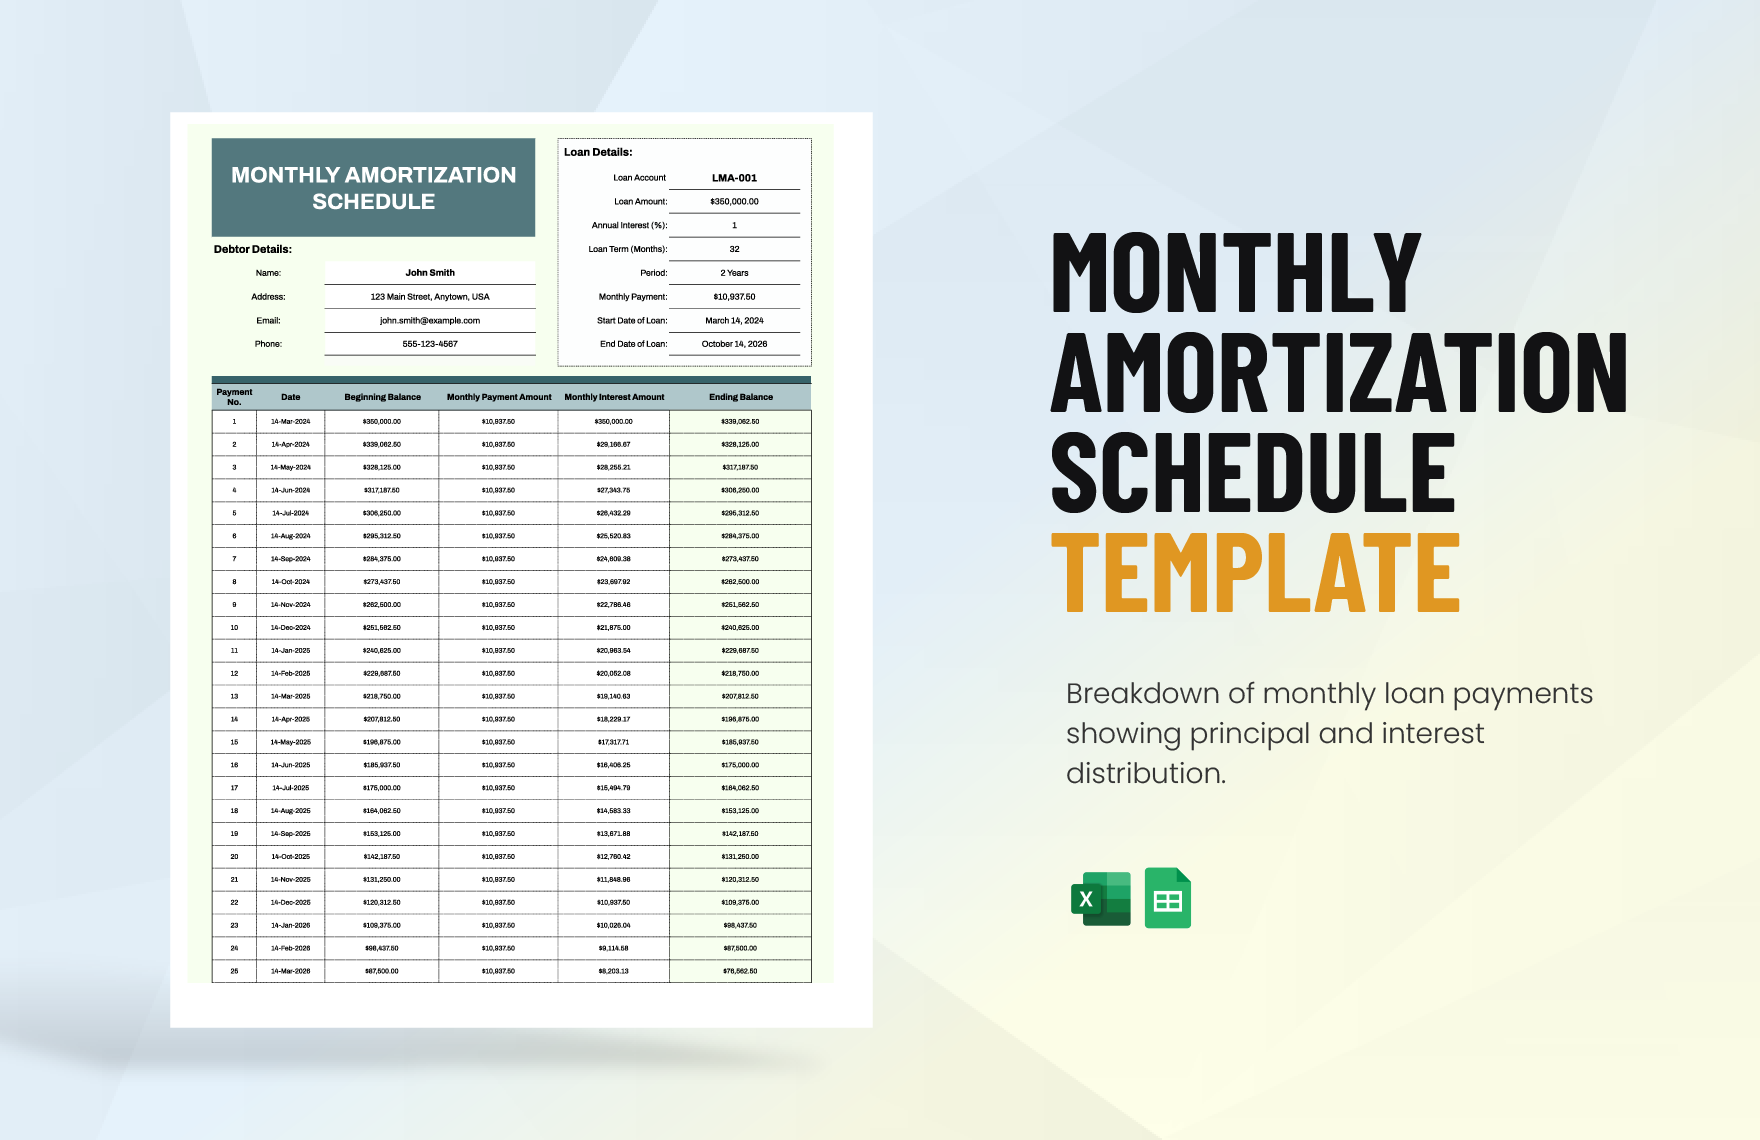 Monthly Amortization Schedule Template